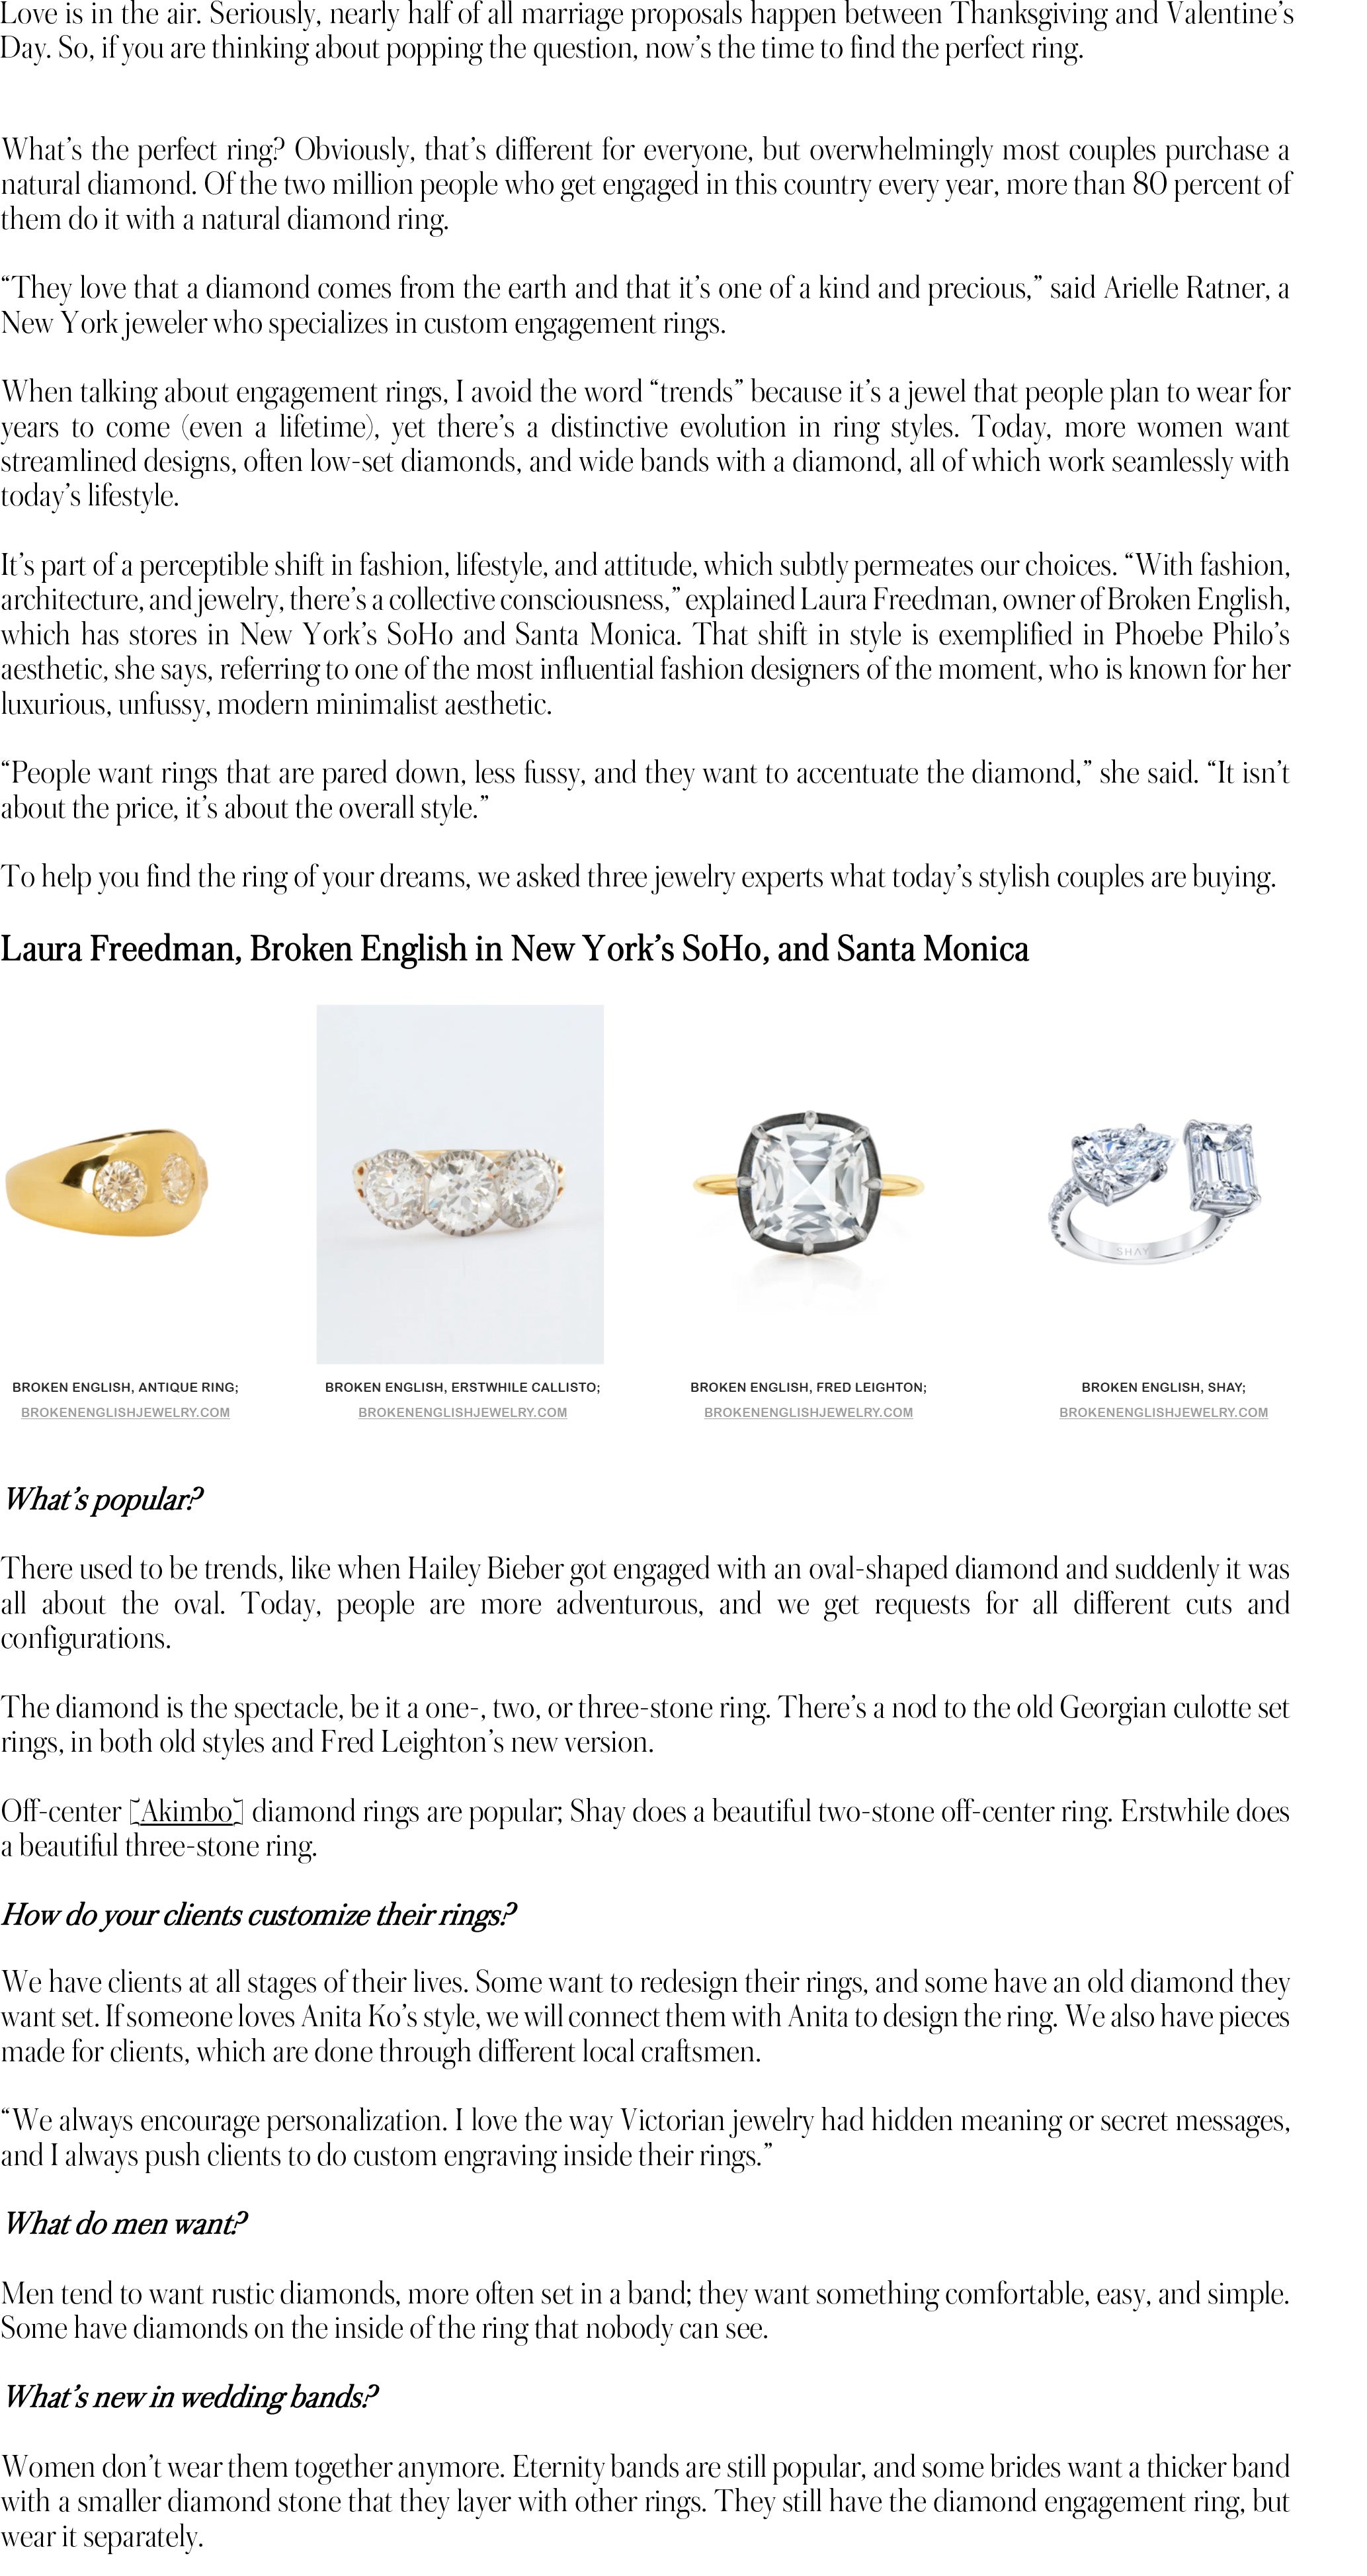 Broken English Jewelry featured in Only Natural Diamonds, The Natural Diamond Engagement Rings on Everyone’s Wish List